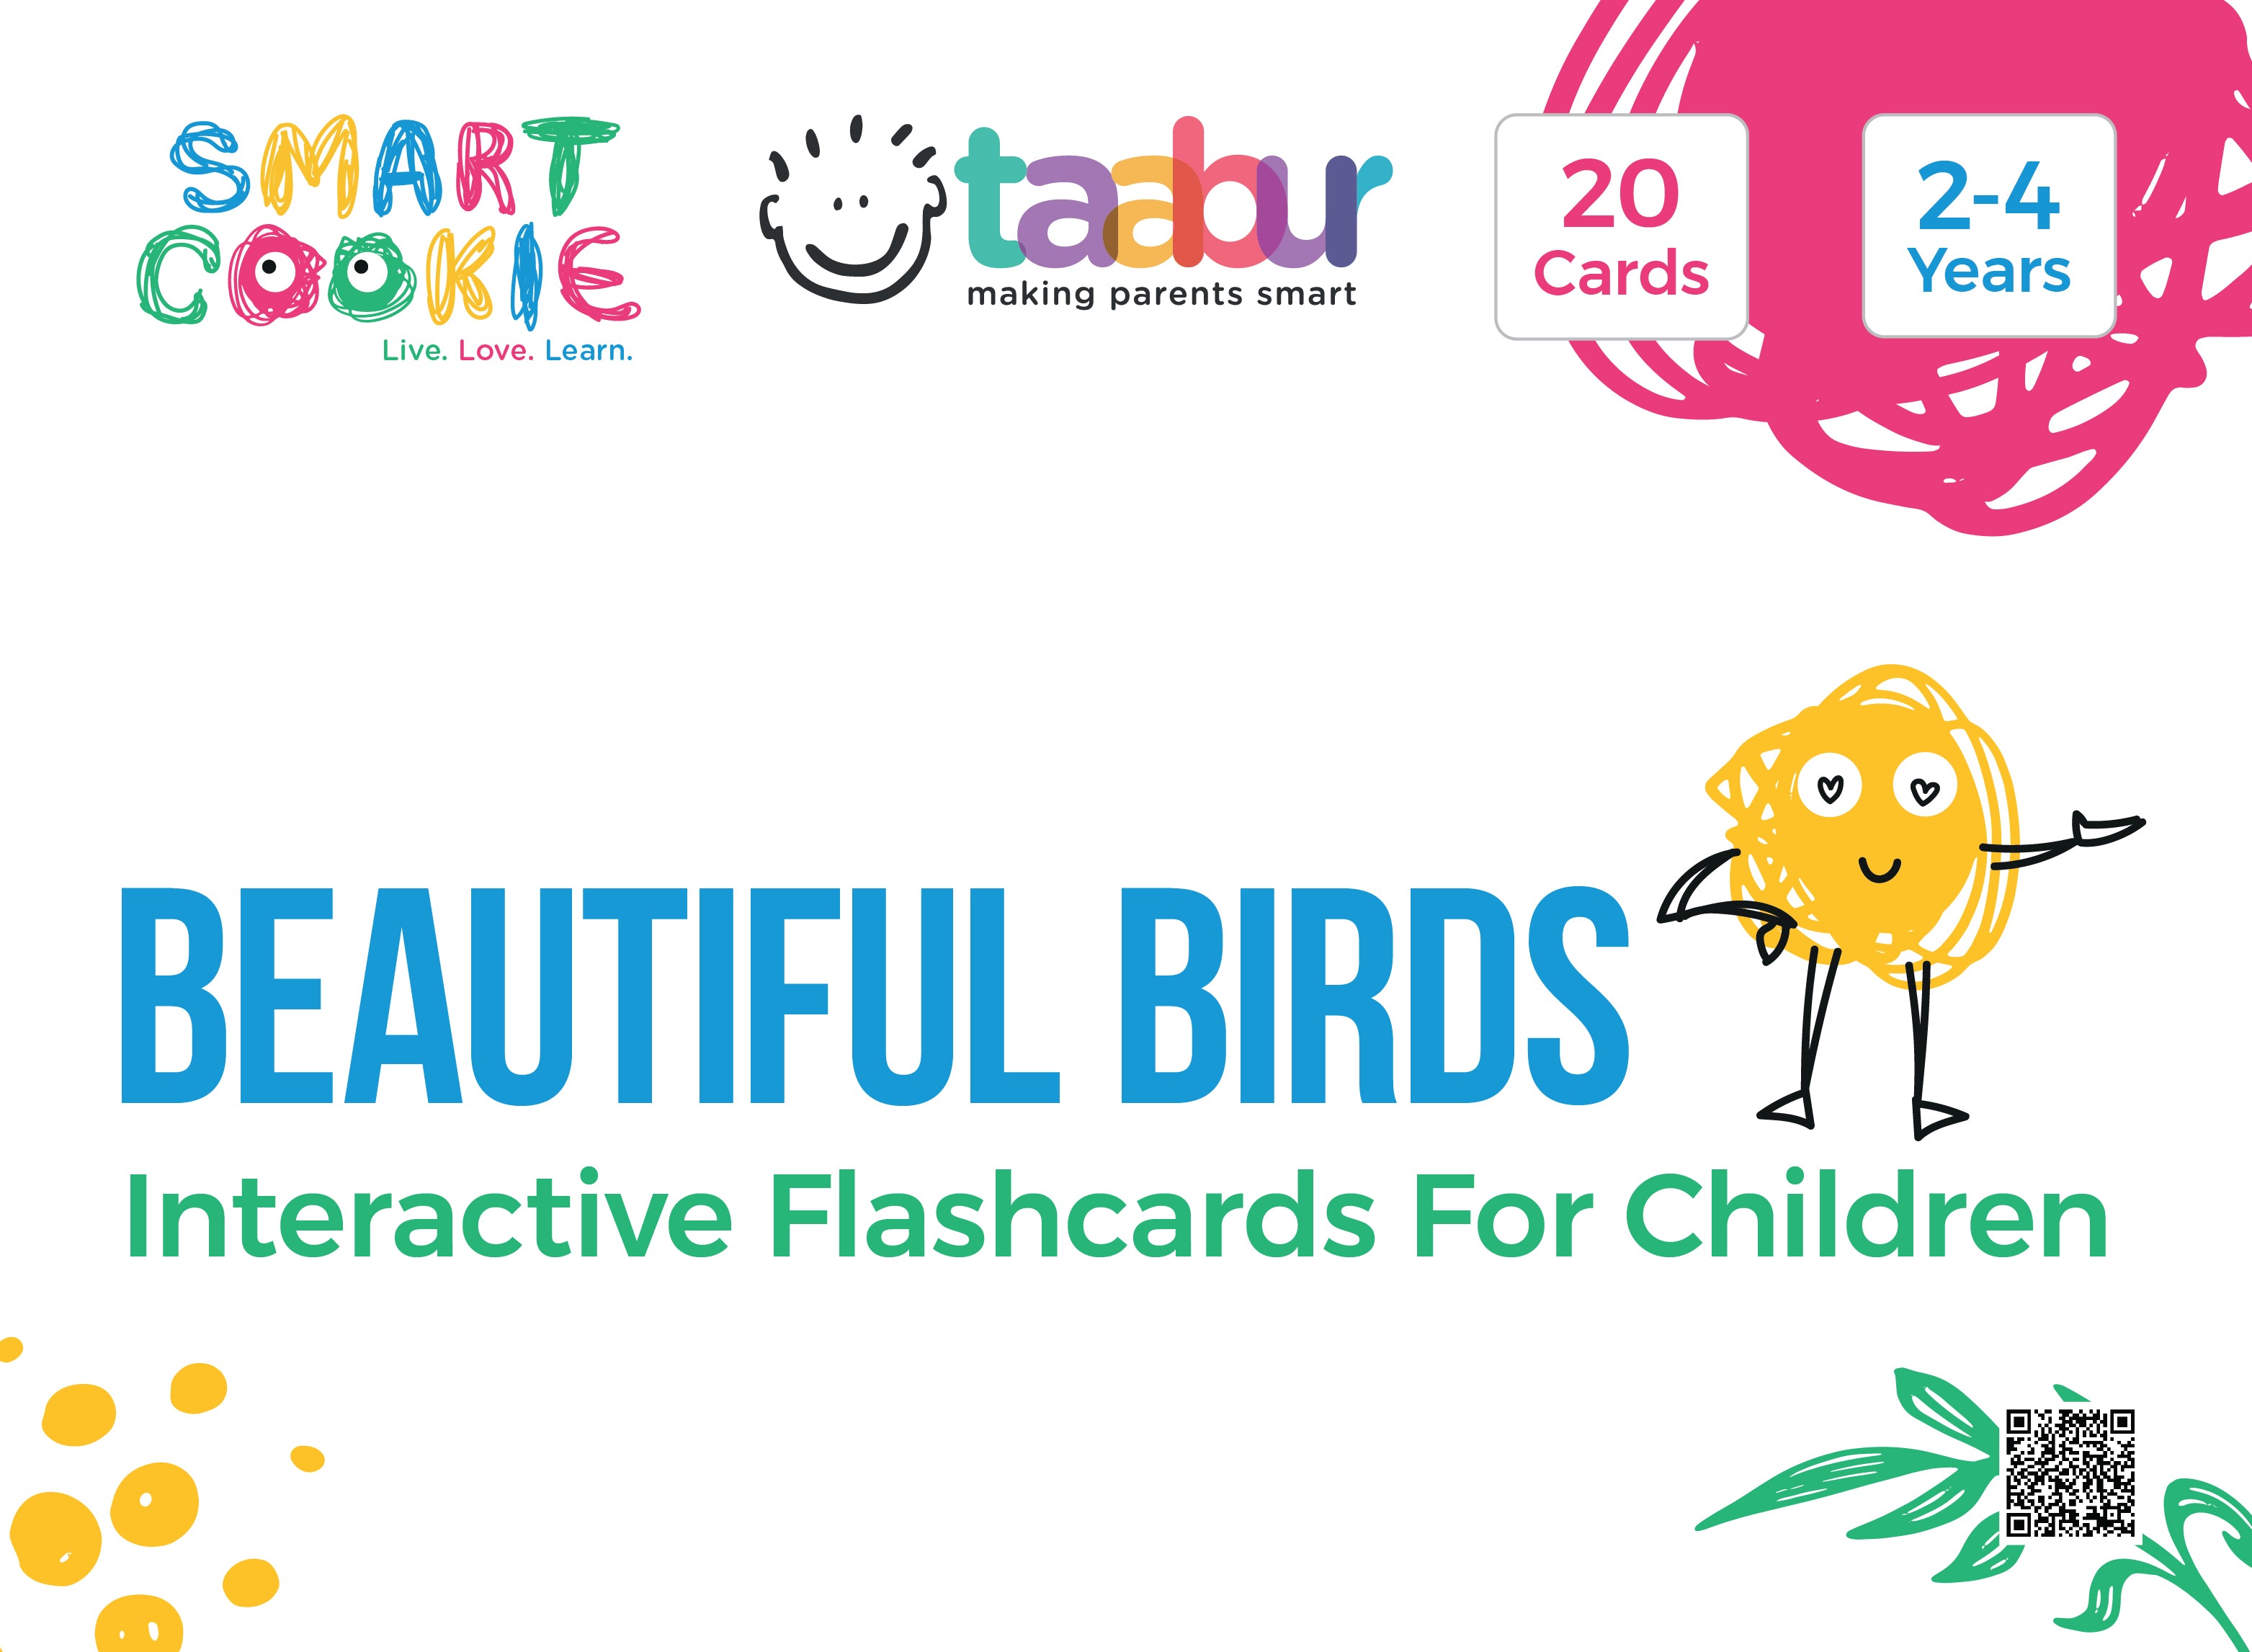 Basic Environment Awareness - 6 Sets of Interactive Flashcards - for Kids Aged 2 to 4 Years Old